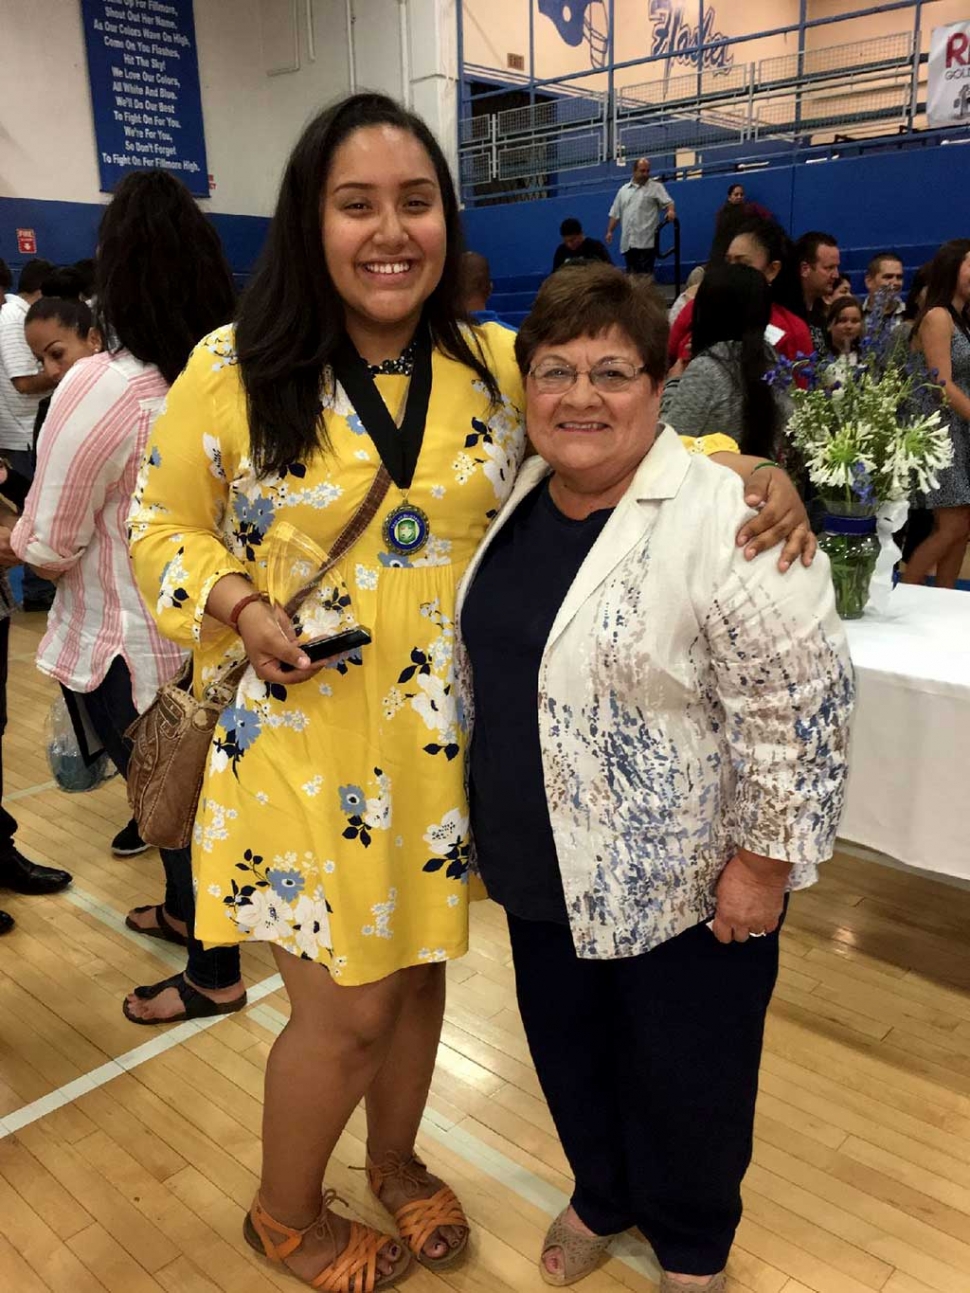 Fillmore High School graduating senior, Alejandra Rodriguez is the recipient of the 2017 Rosie Torres Scholarship For Future Teachers. Torres, a retired Fillmore teacher and long-time school volunteer, recently presented the award at an on-campus ceremony.